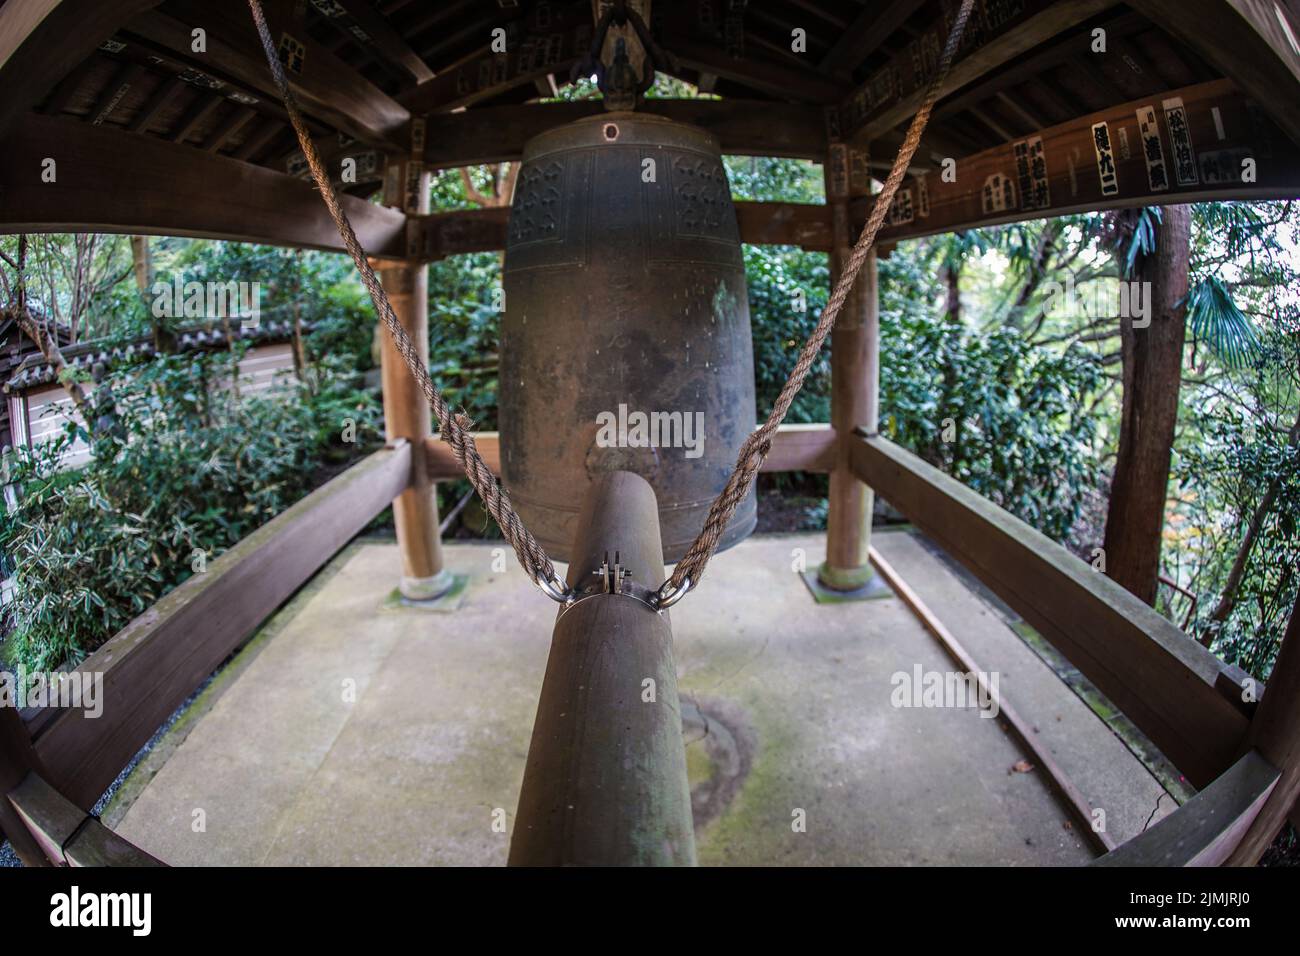 Temple bell and a fresh green image Stock Photo